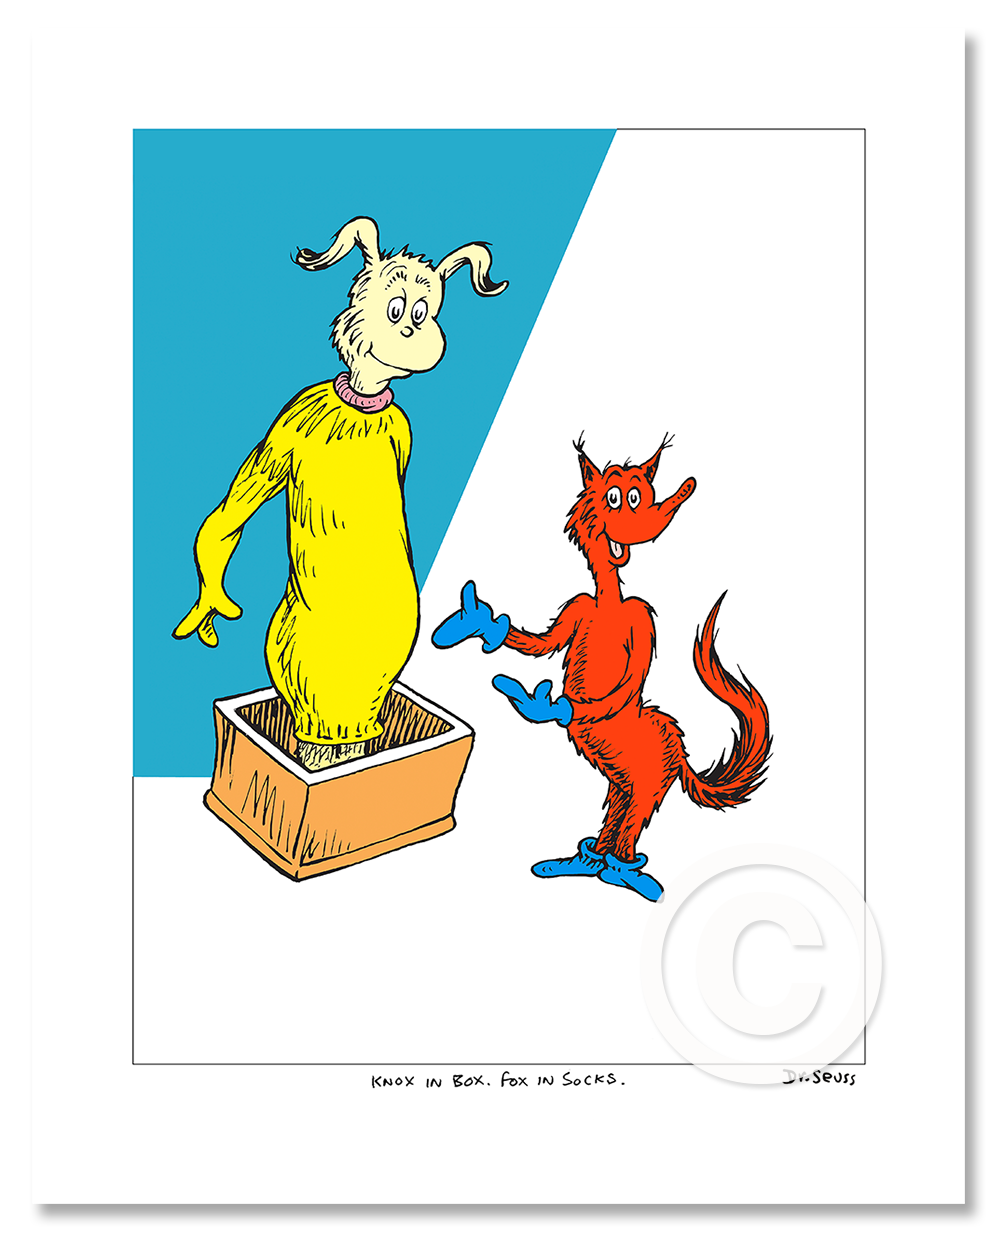 Knox in Box. Fox in Socks. — The Art of Dr. Seuss Collection, Published by  Chaseart Companies